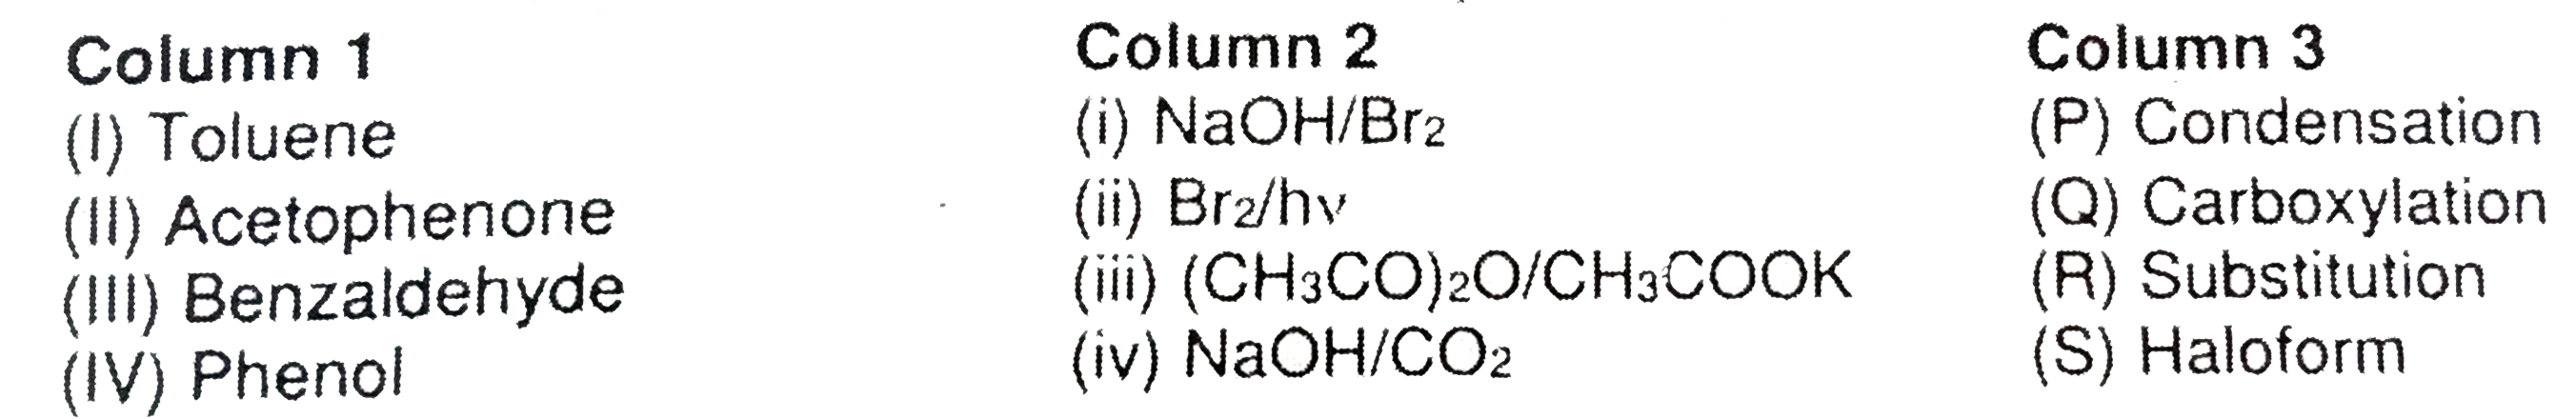 Column 1,2 and 3 contain starting materials, reaction conditions, and type of reactions, respectively      The only CORRECT combination that gives two different carboxylic acid is